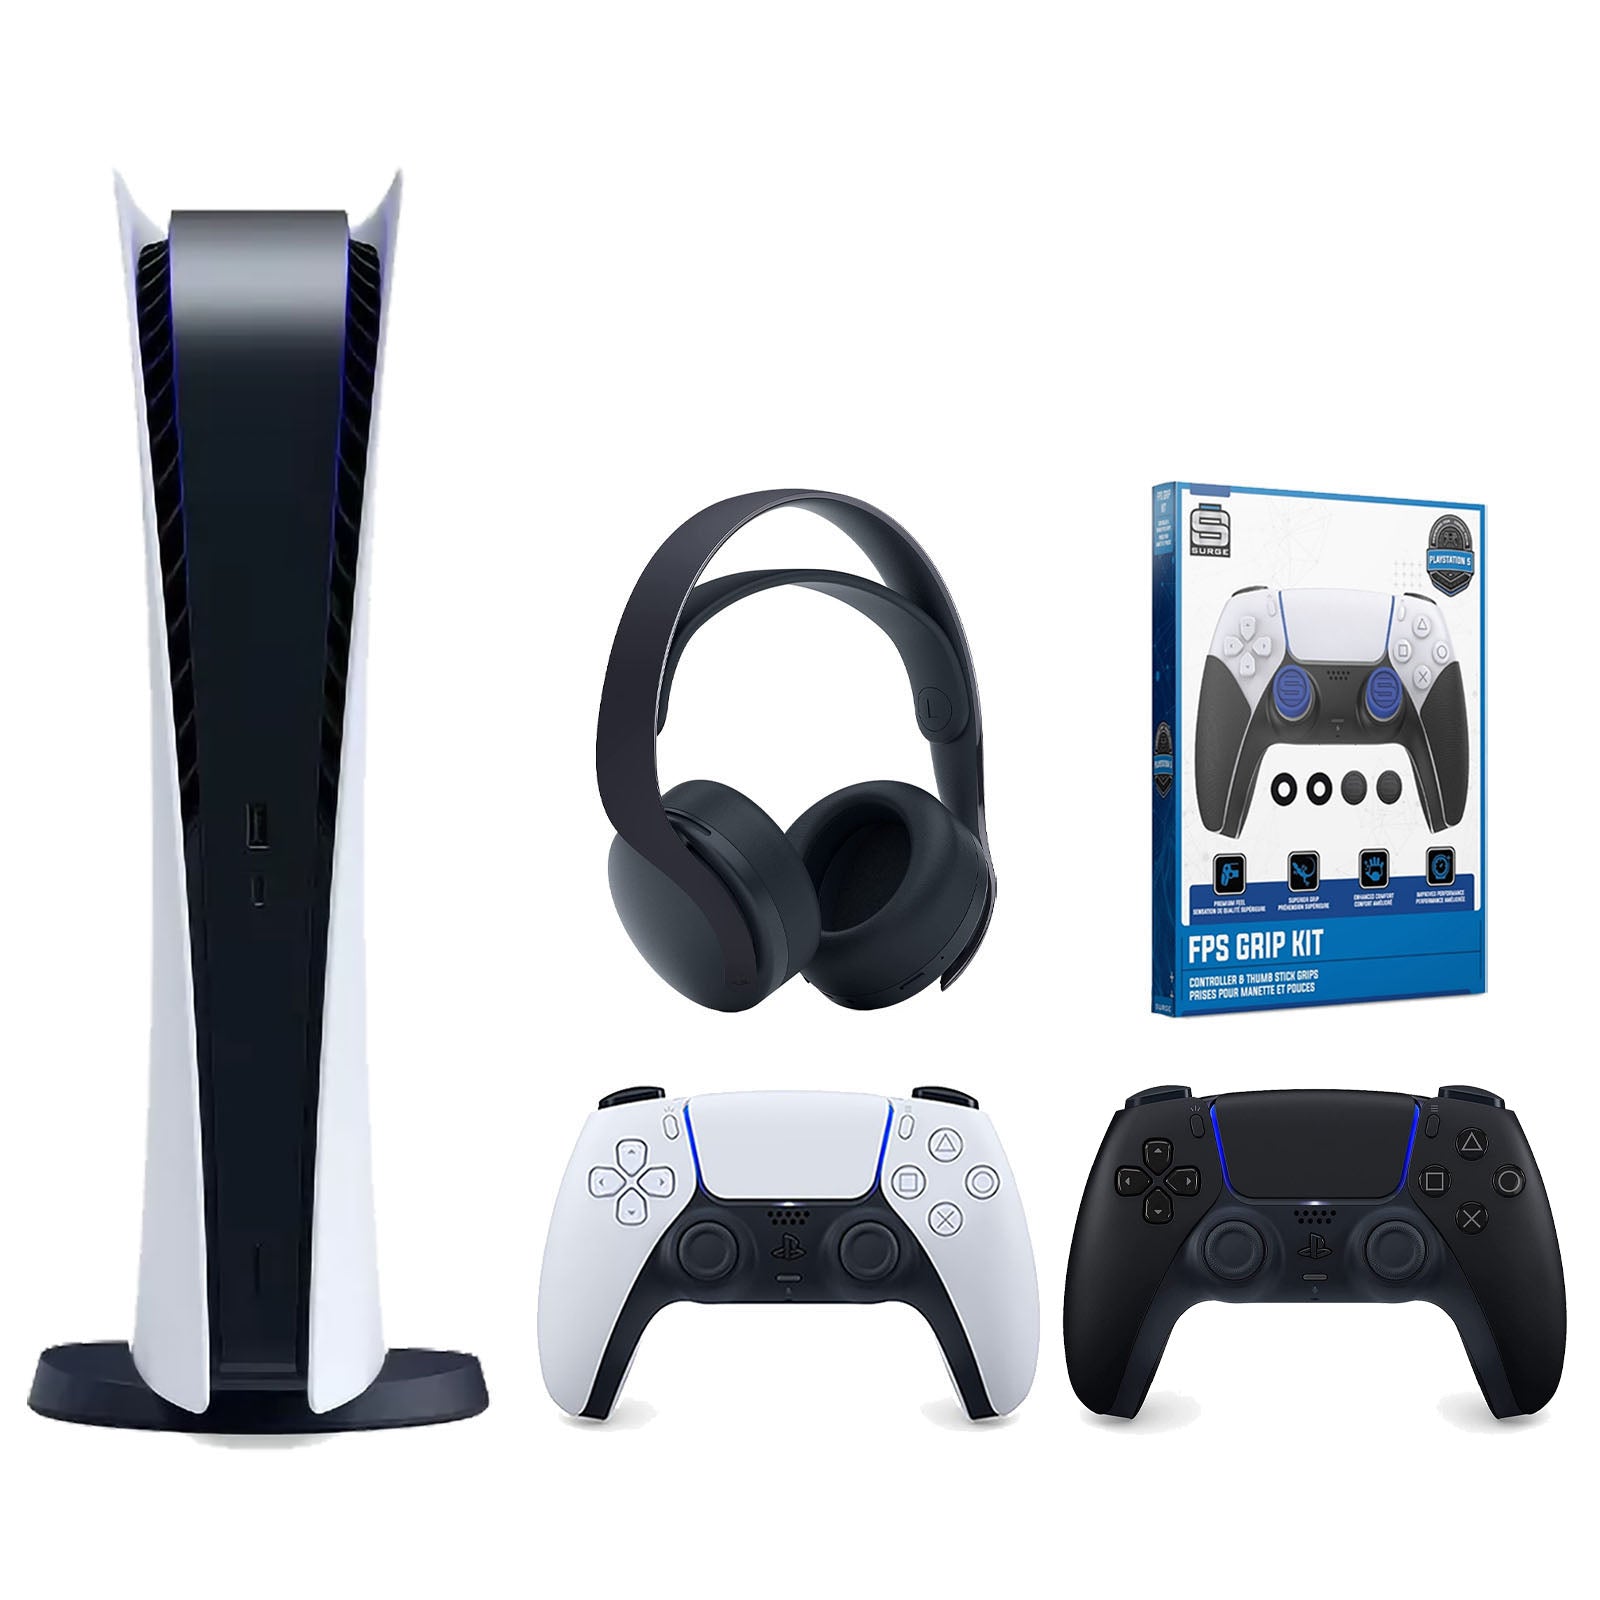 Sony Playstation 5 Digital Edition Console with Extra Black Controller, Black PULSE 3D Headset and Surge FPS Grip Kit With Precision Aiming Rings Bundle - Pro-Distributing